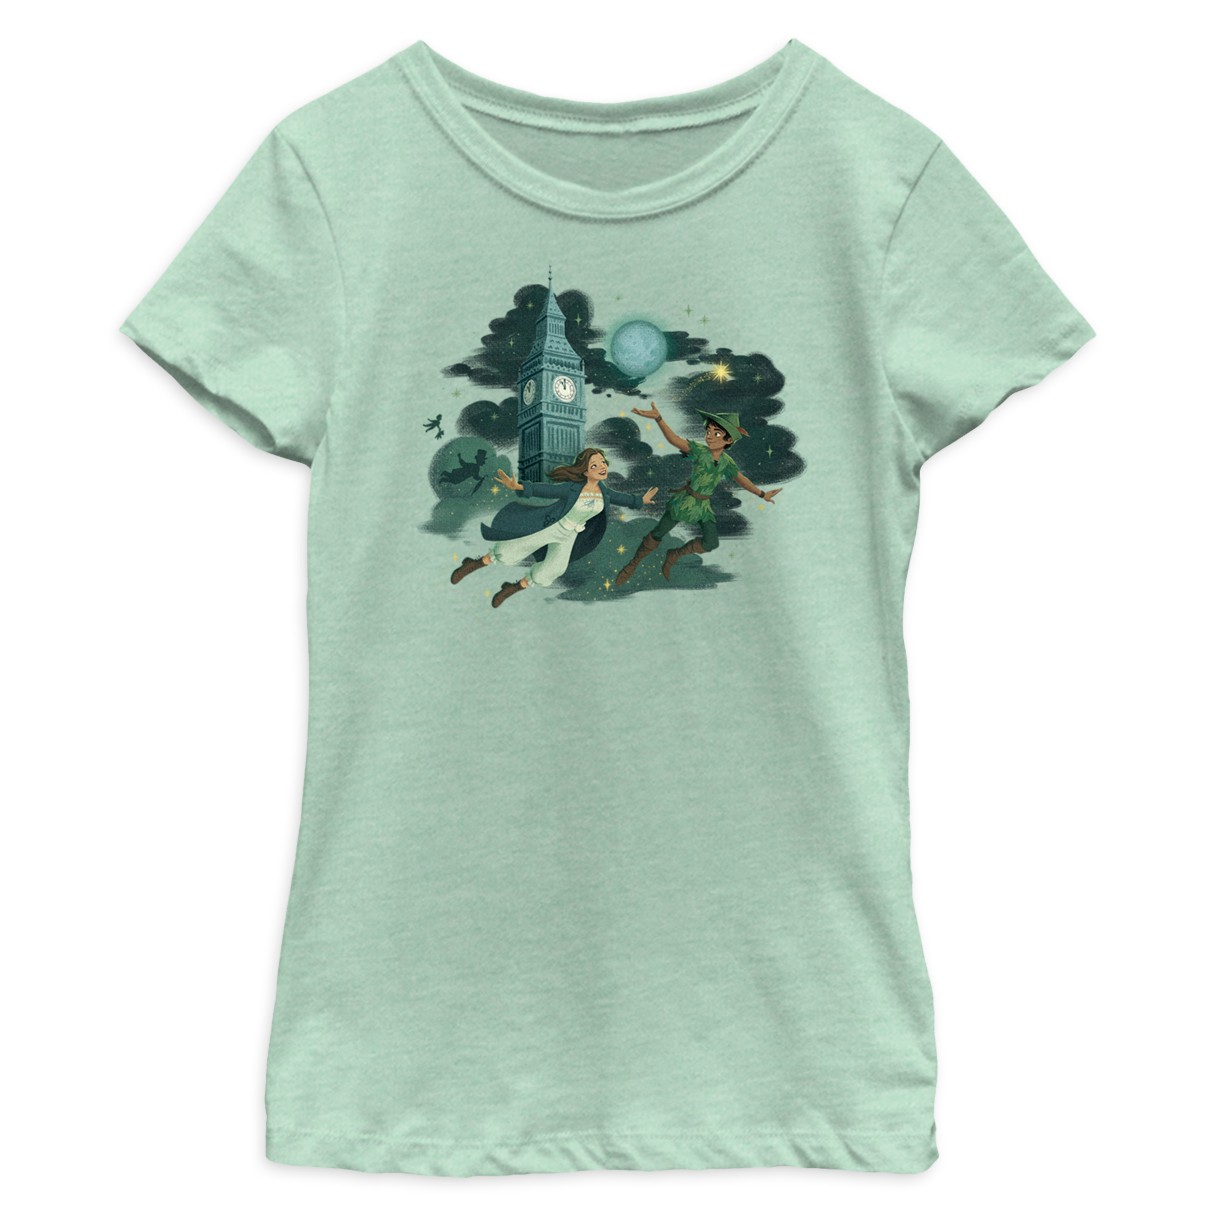 Peter Pan & Wendy T-Shirt for Girls – Live Action Film